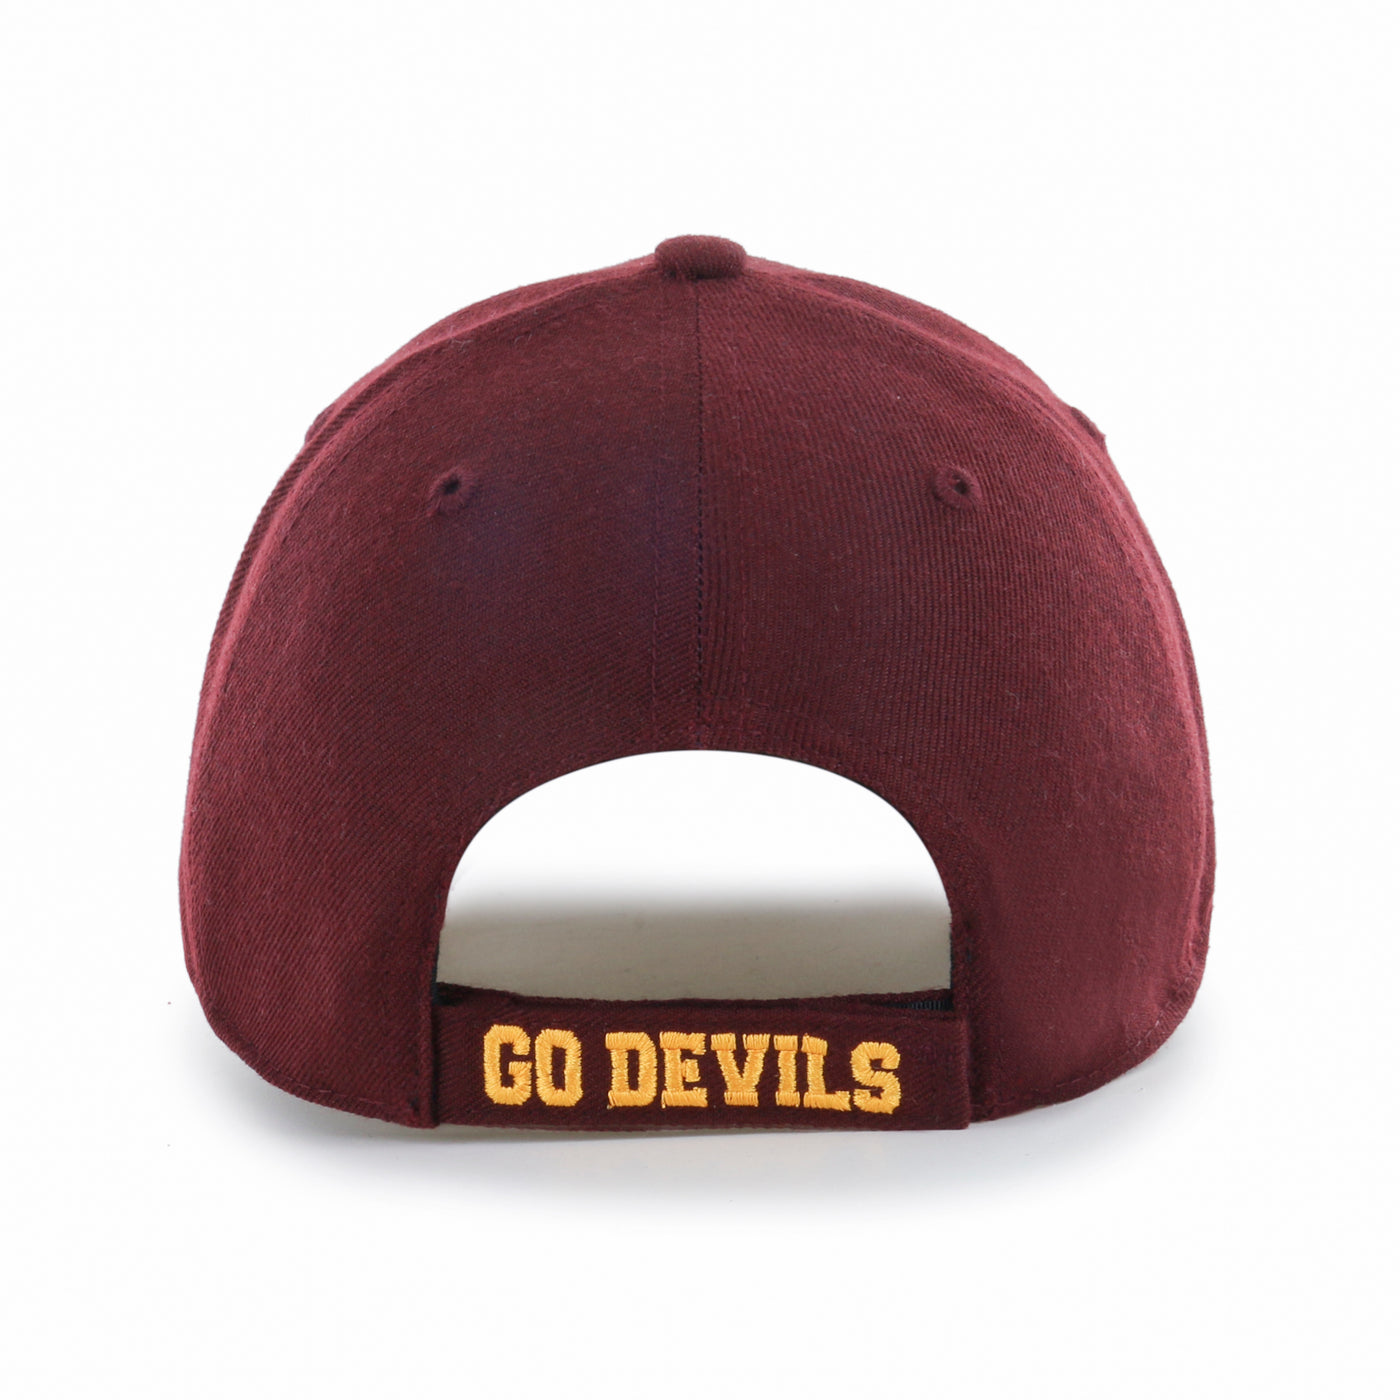 Back of ASU maroon hat with 'Go Devils' embroidered on the velcro strap